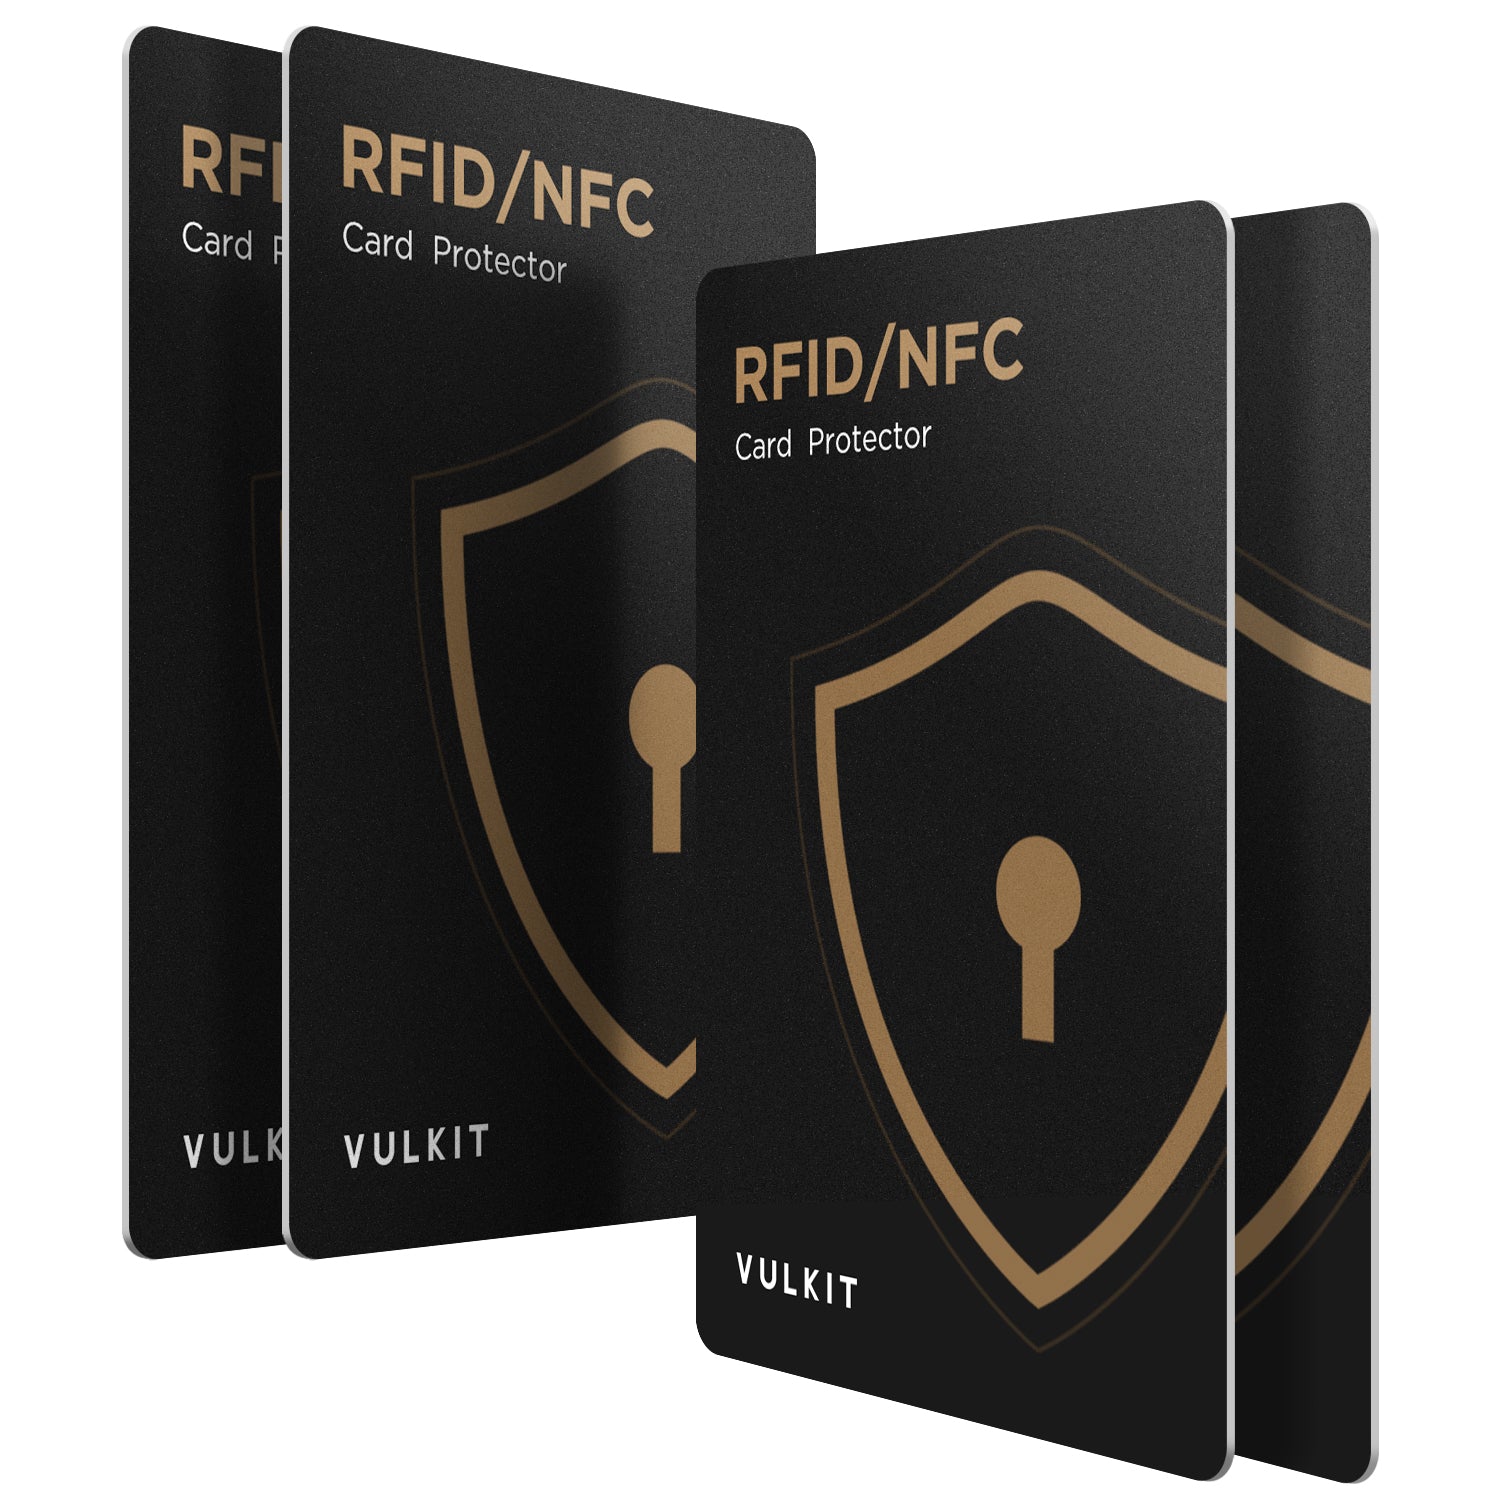 RFID Blocker Card Black (2 for 1), 2 for 1 promotion, Fast free shipping